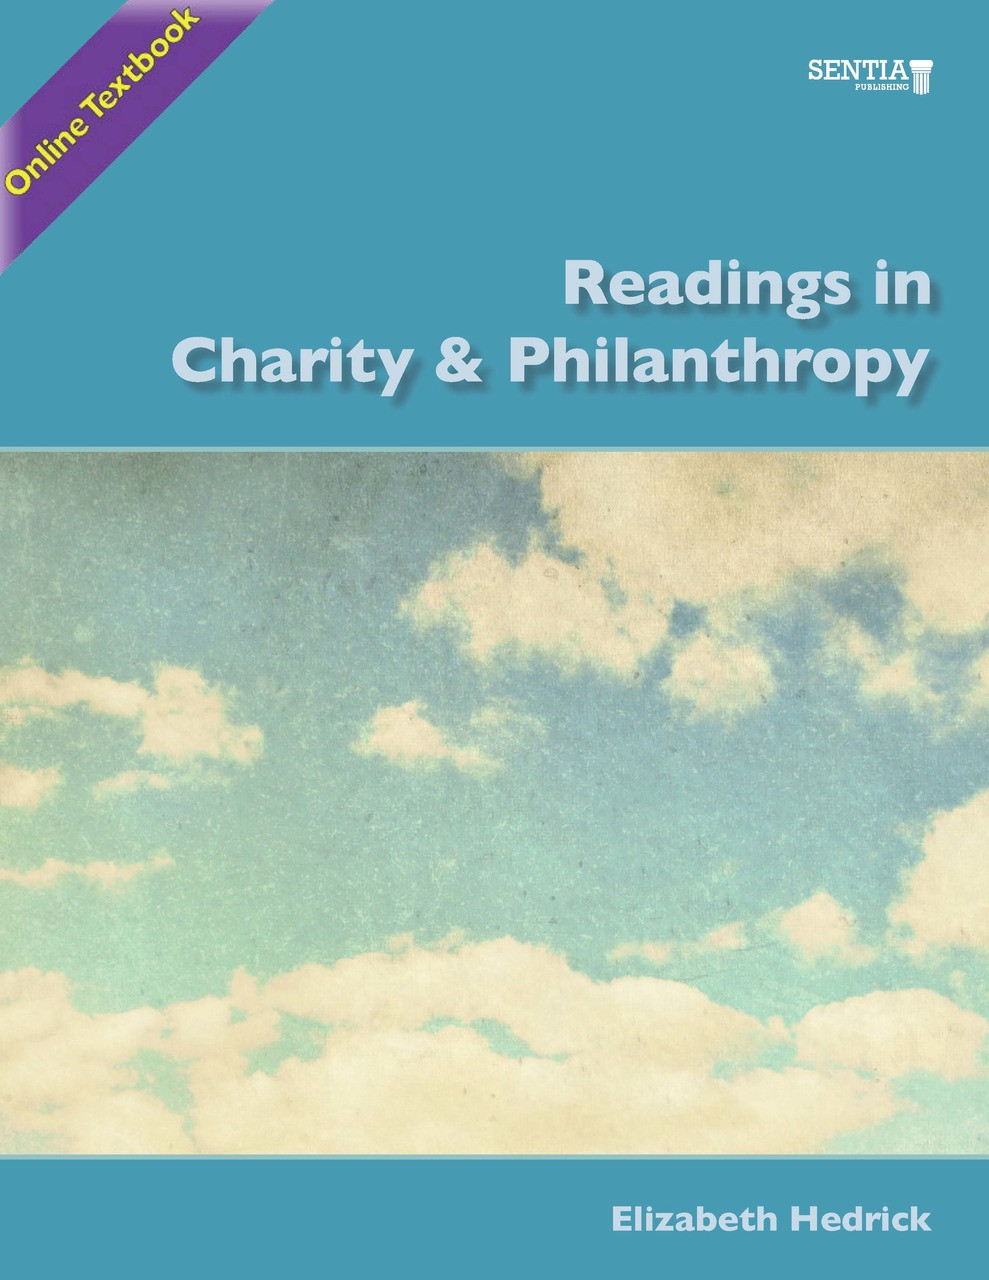 Philanthropy　Readings　Publishing　in　Sentia　(Elizabeth　Charity　and　Textbook　Hedrick)　Online